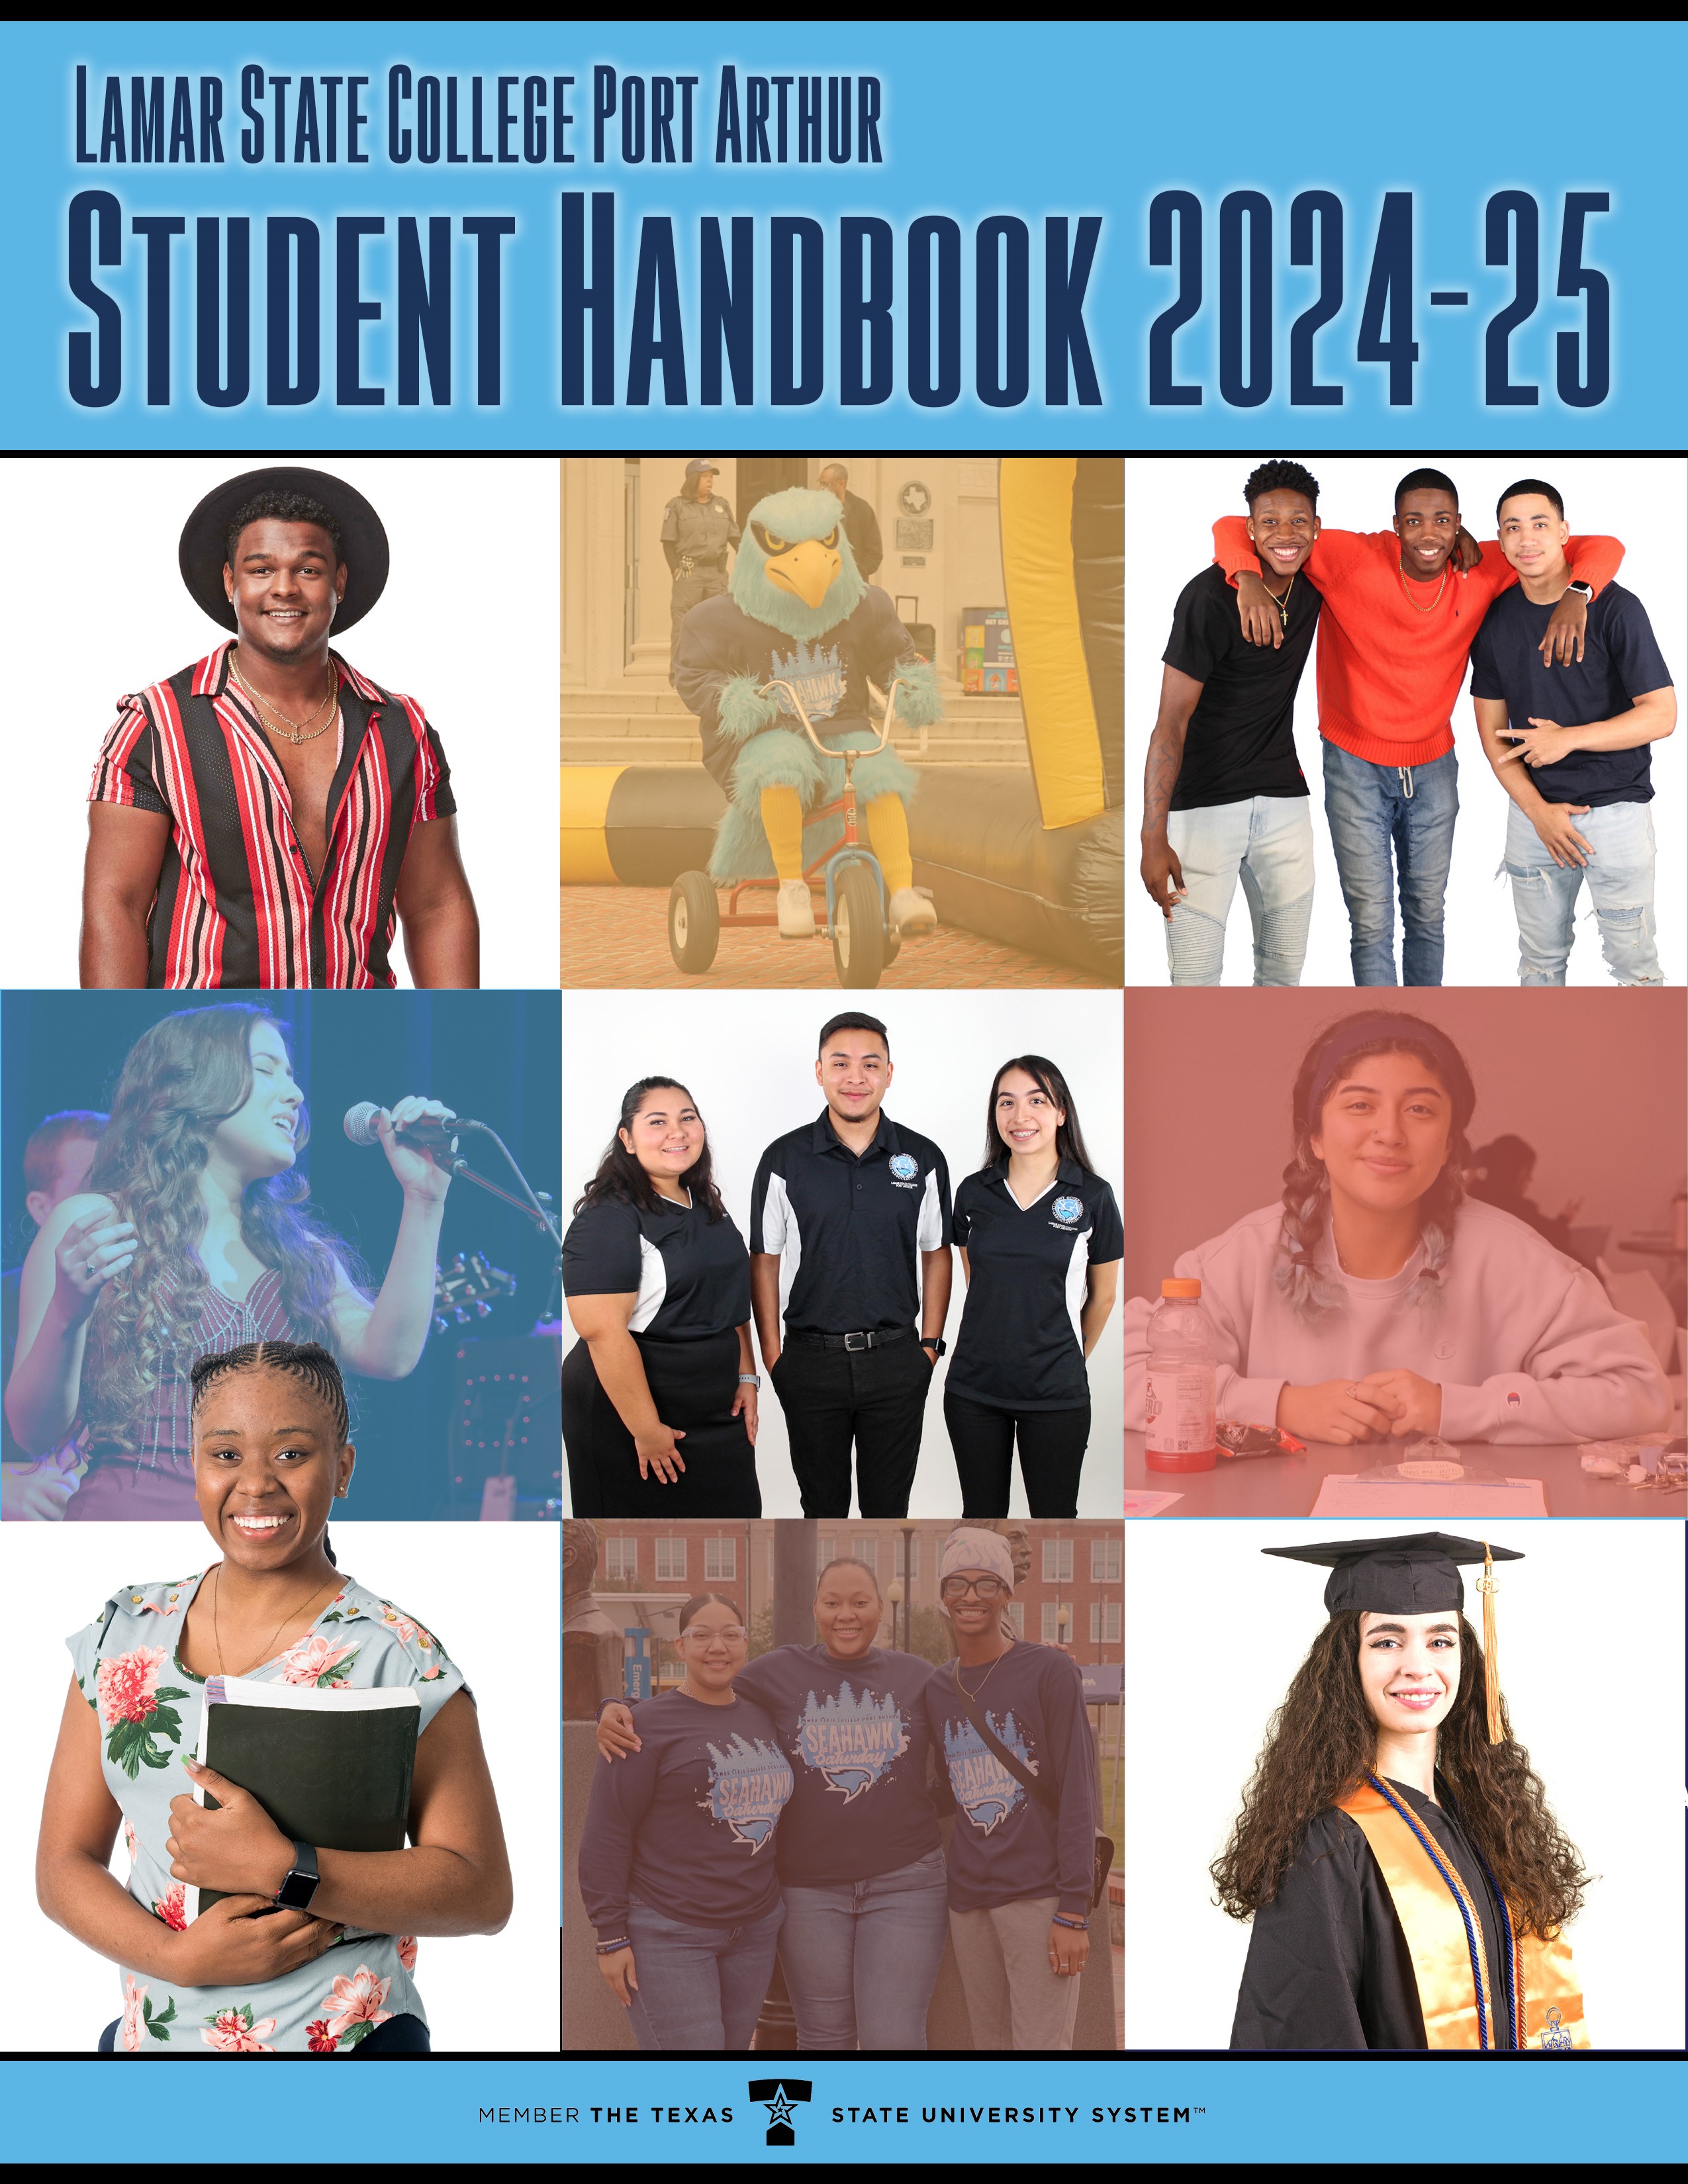 Lamar State College Port Arthur Student Handbook 2024-2025 collage of student images 